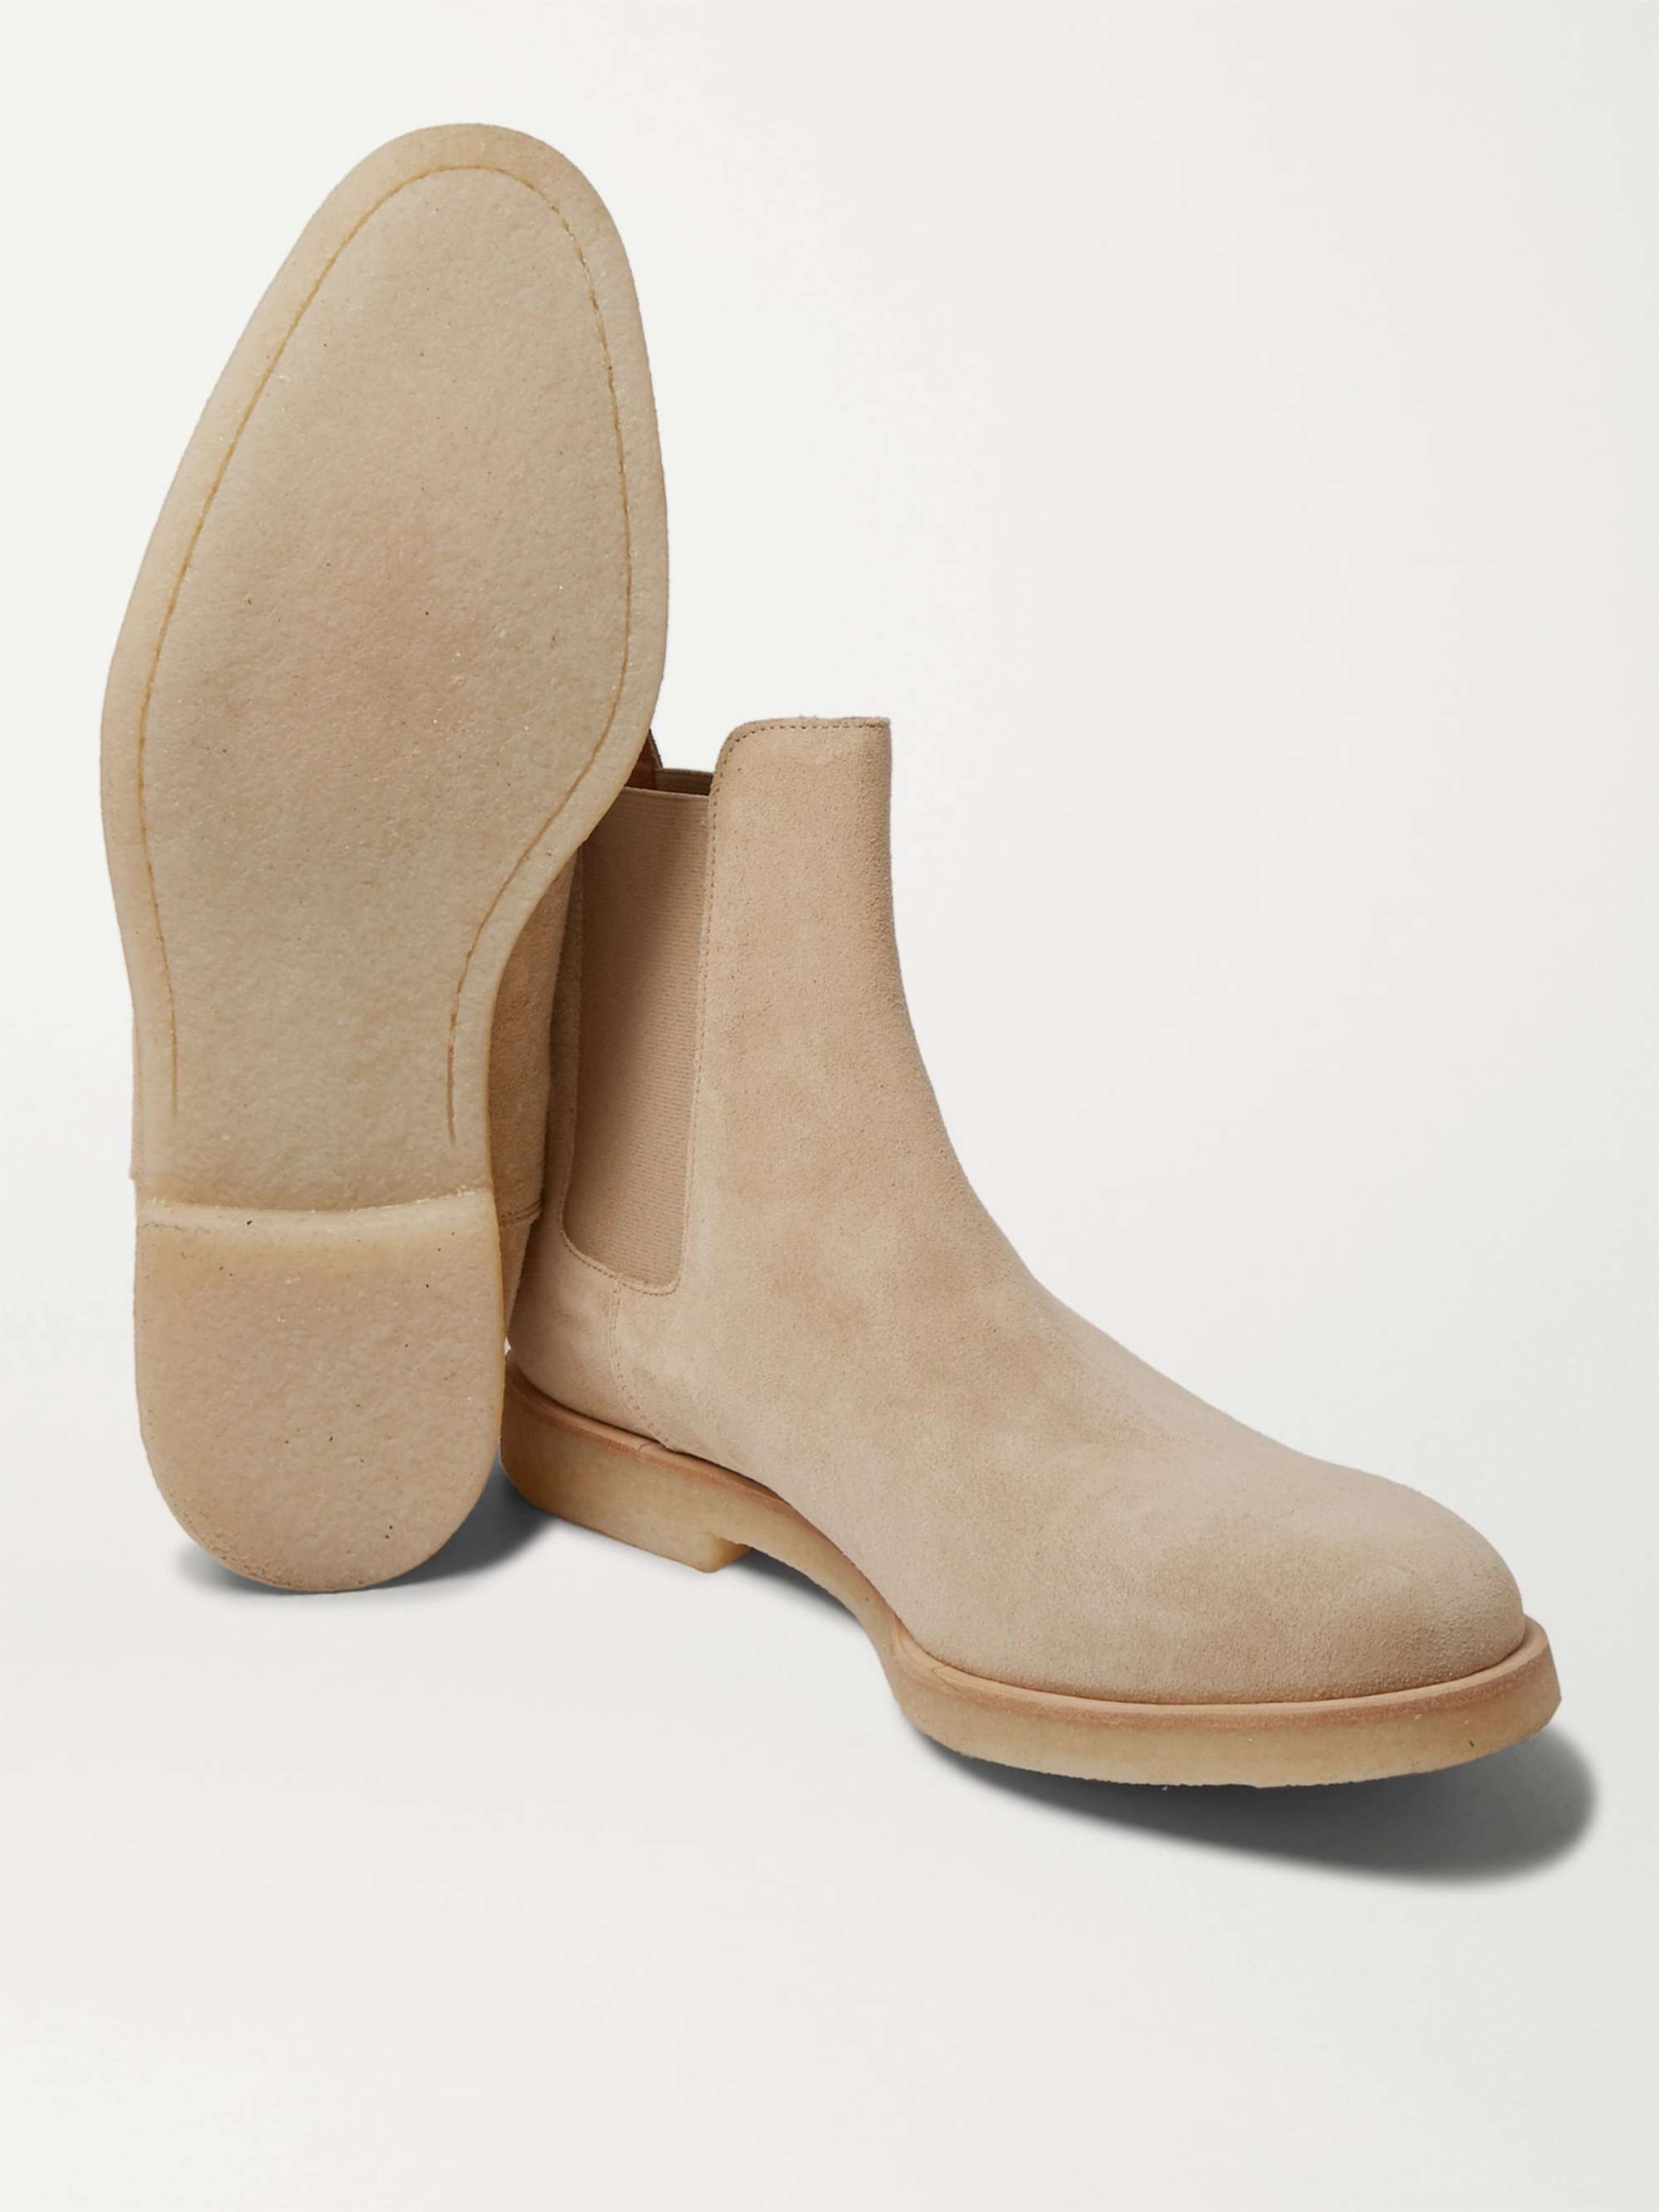 COMMON PROJECTS Suede Chelsea Boots | MR PORTER